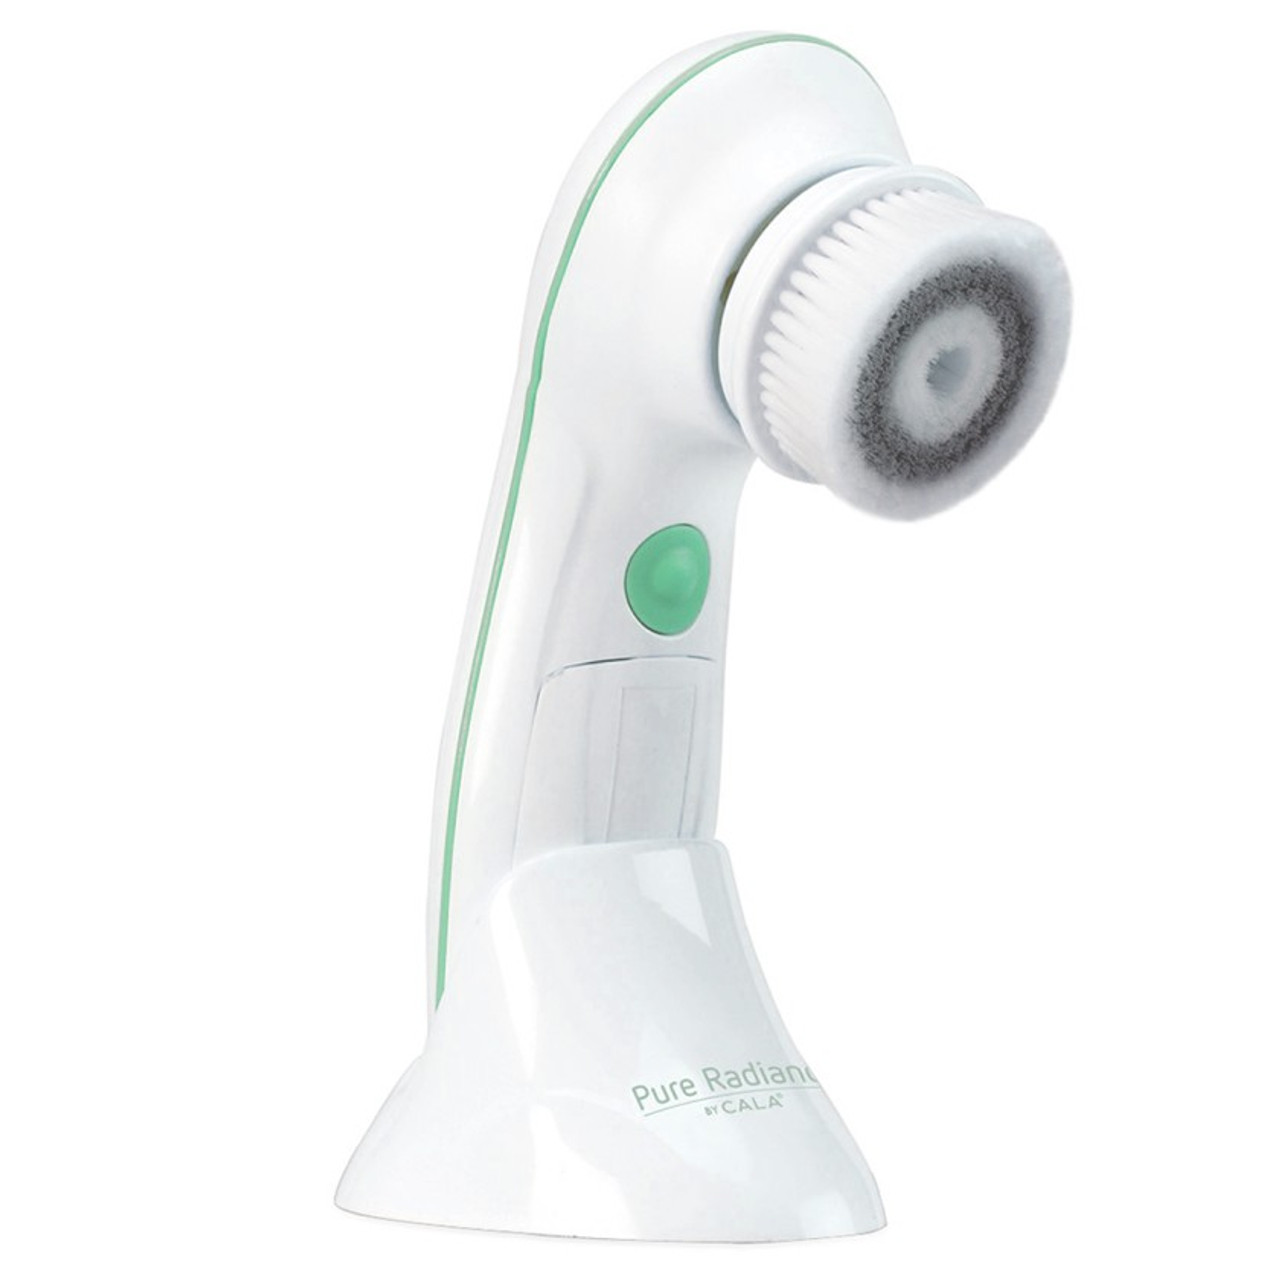 Sonic Facial Cleansing System | 3 Brush Heads | 2 Speeds | CALA